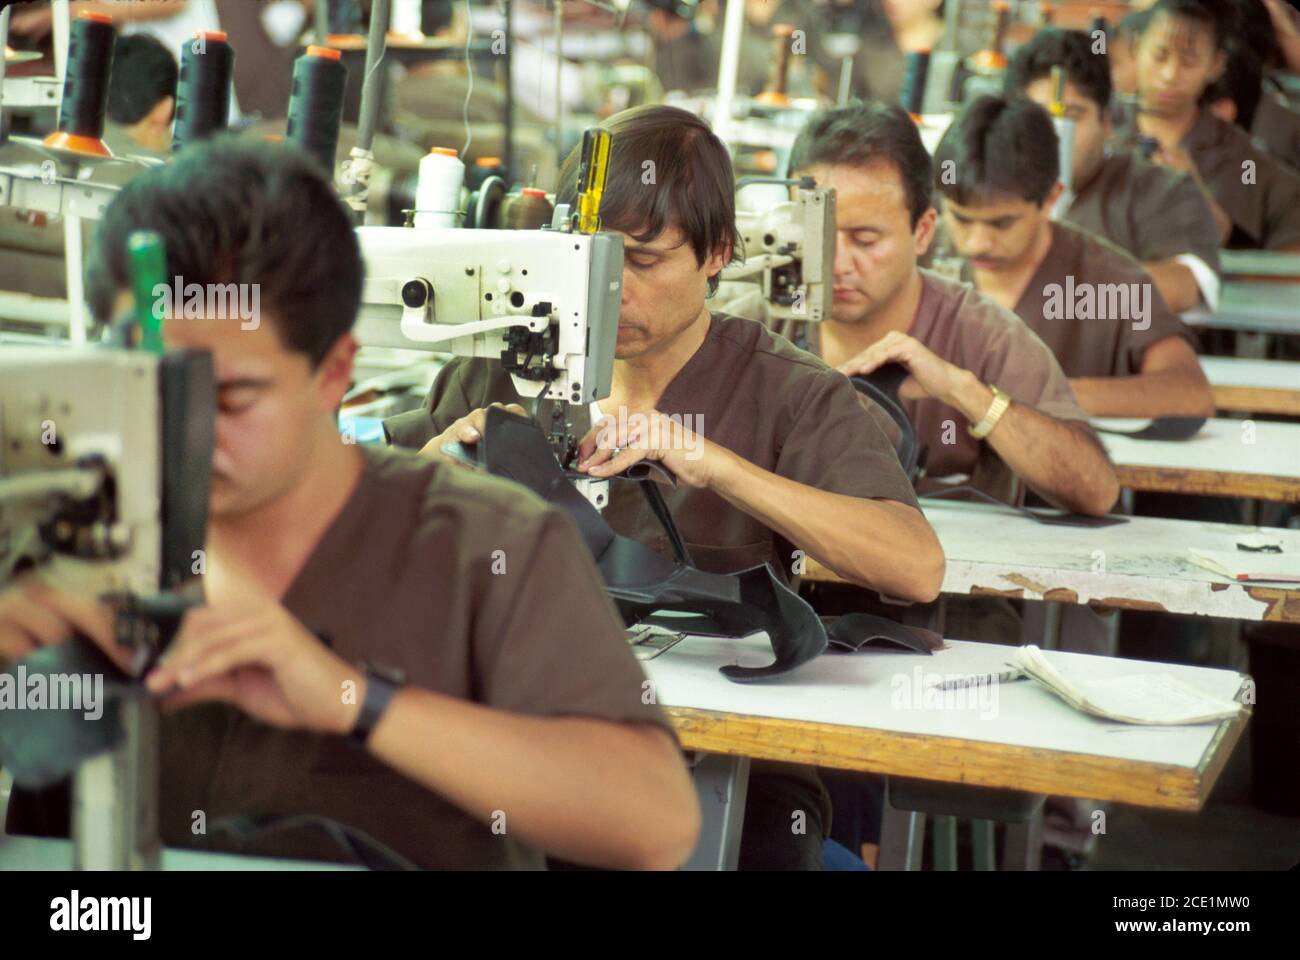 Leon Mexico,Mexicans Hispanic Guanajuato State,Emyco Shoe Factory,workers employees,working production line sewing shoes boots manufacturing plant Stock Photo